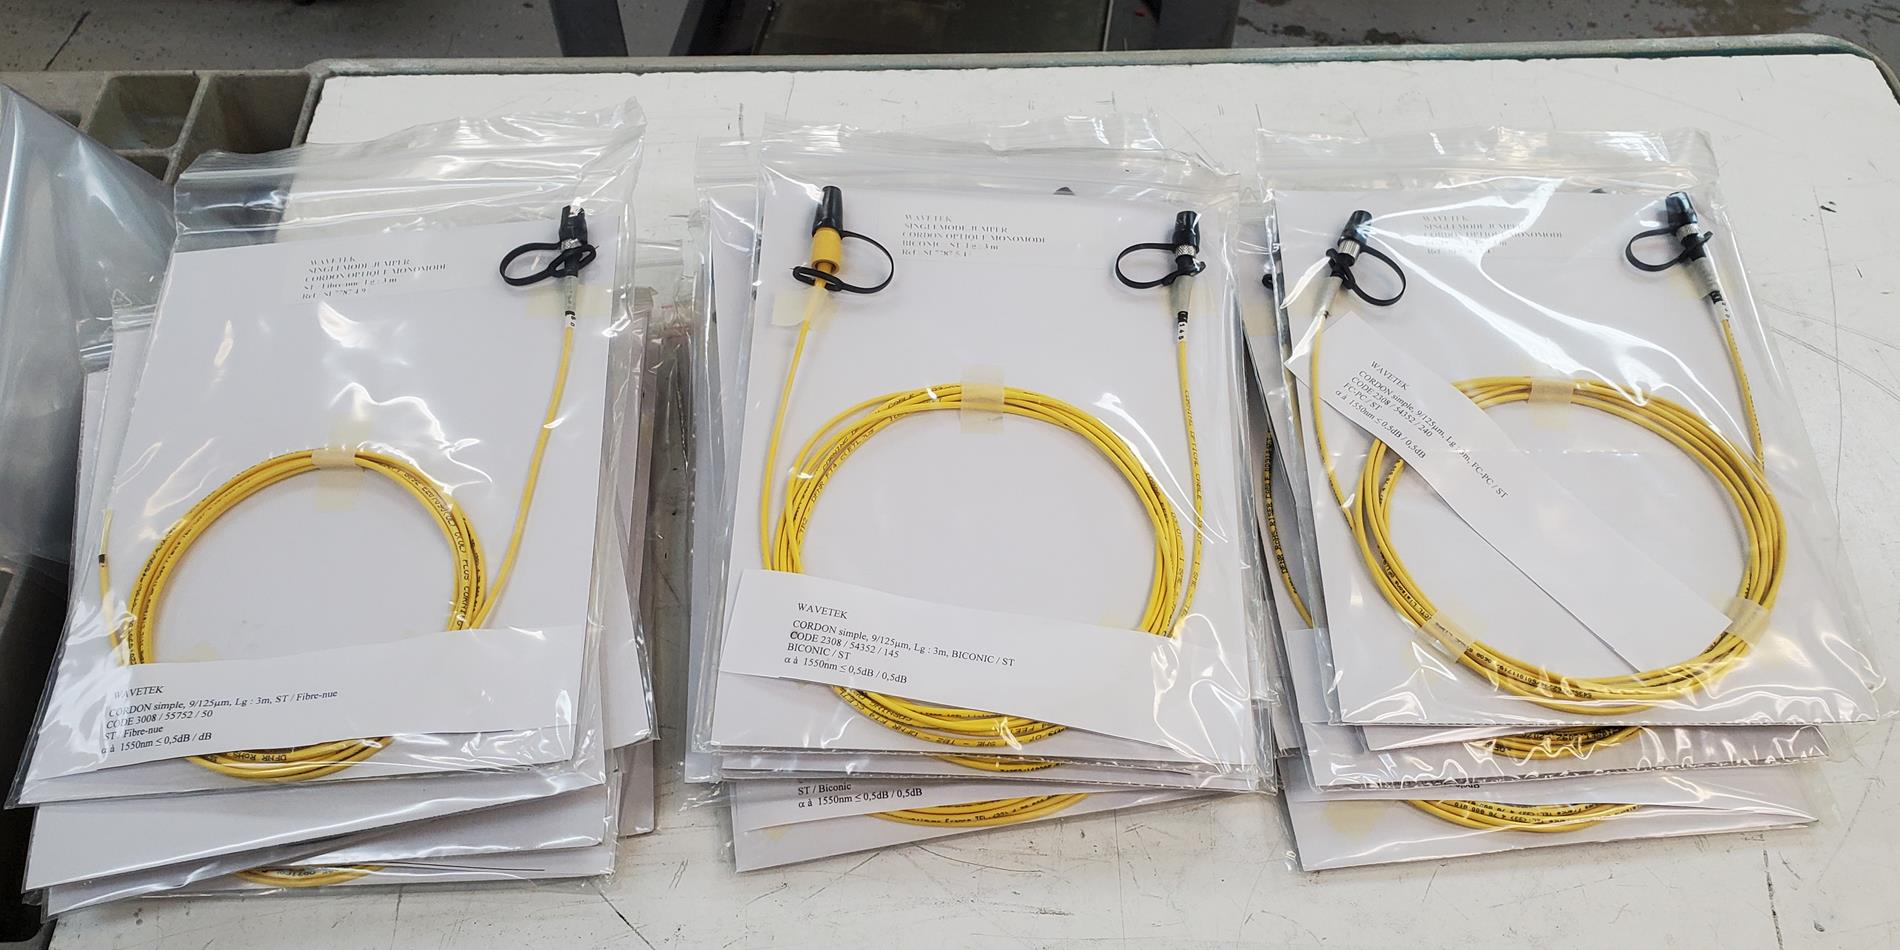 AccuSource mixed patchcords just arrived